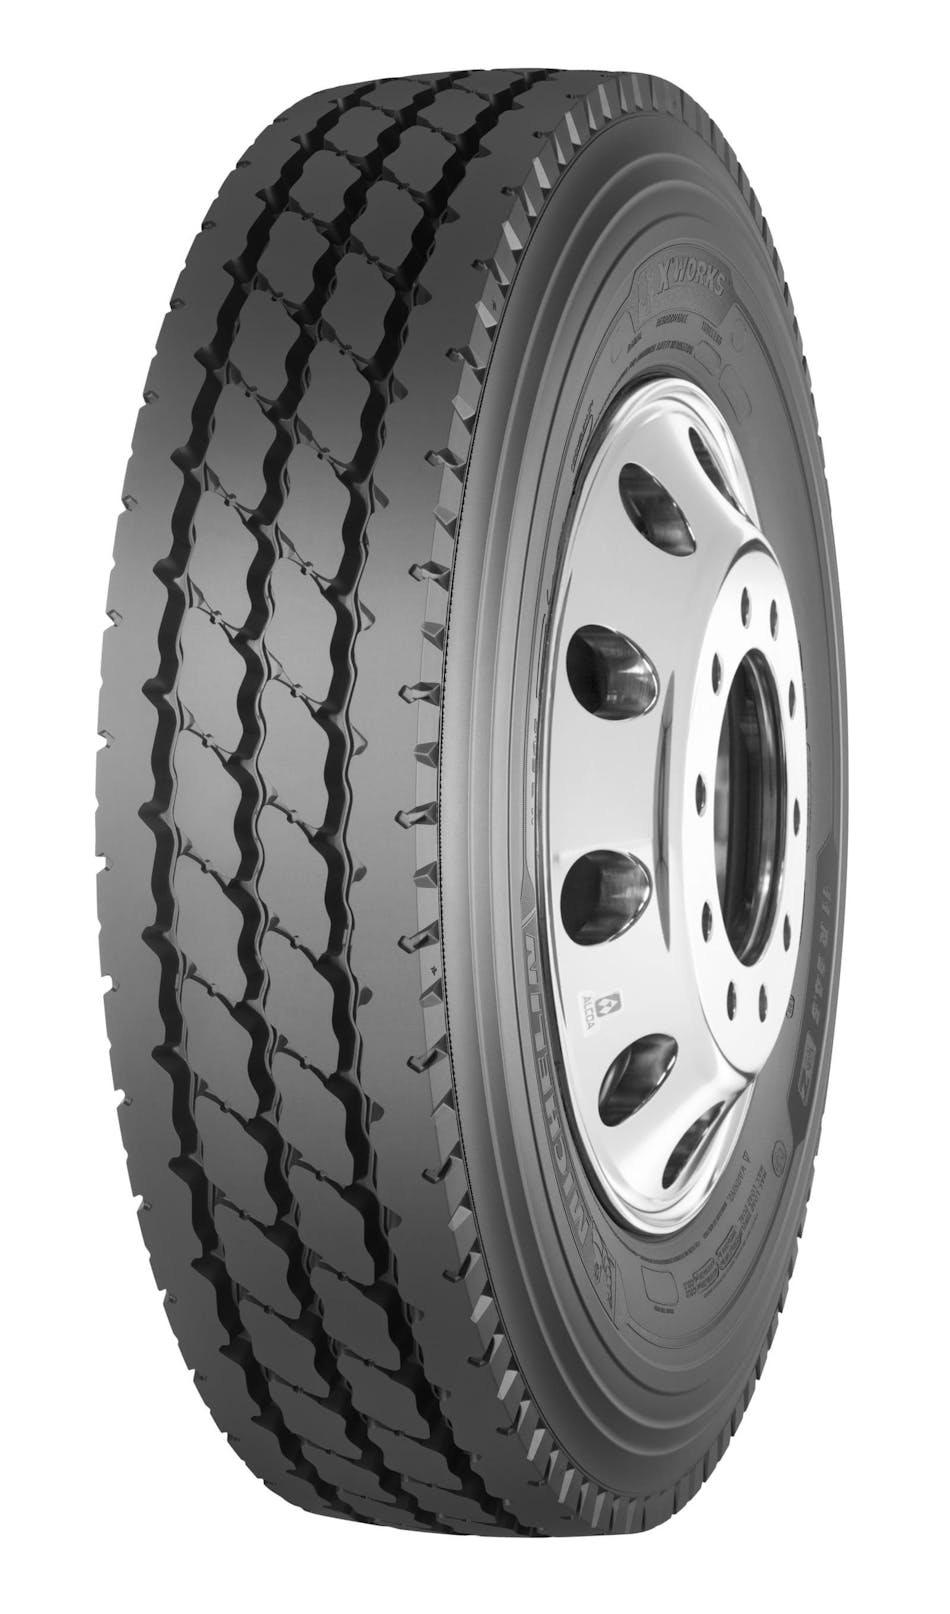 michelin-s-new-x-works-z-all-position-tire-has-a-road-hazard-guarantee